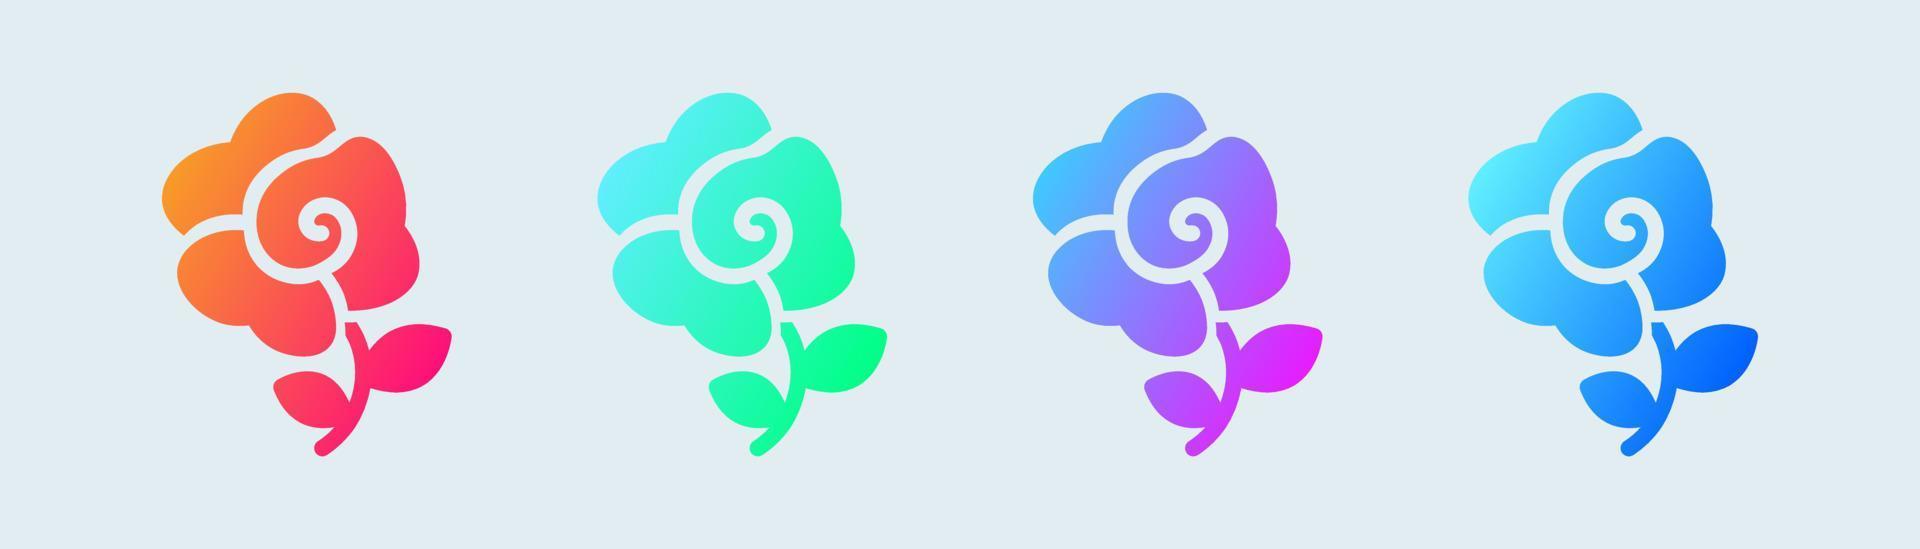 Flower solid icon in gradient colors. Rose signs vector illustration.